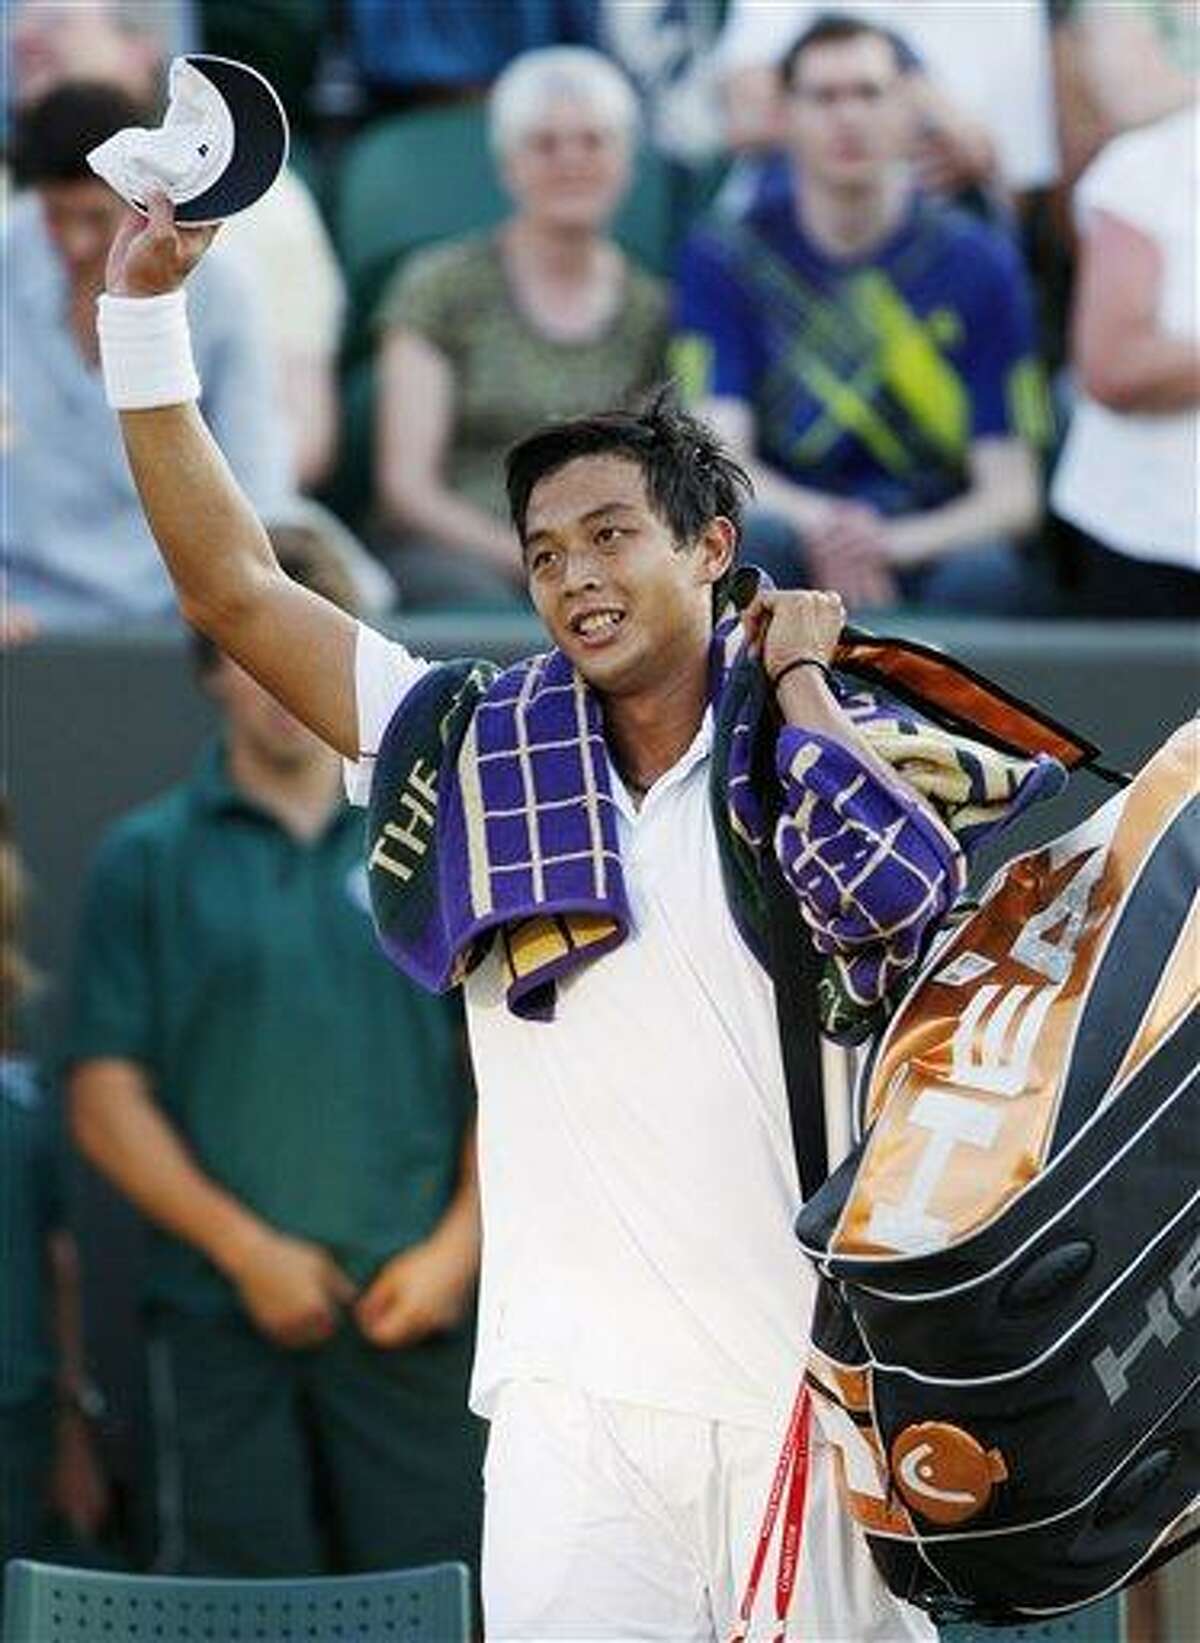 Taiwan's Lu Yen-Hsun waves to the crowd as he celebrates his win over Andy Roddick of the U.S. at the All England Lawn Tennis Championships at Wimbledon, Monday. (AP)